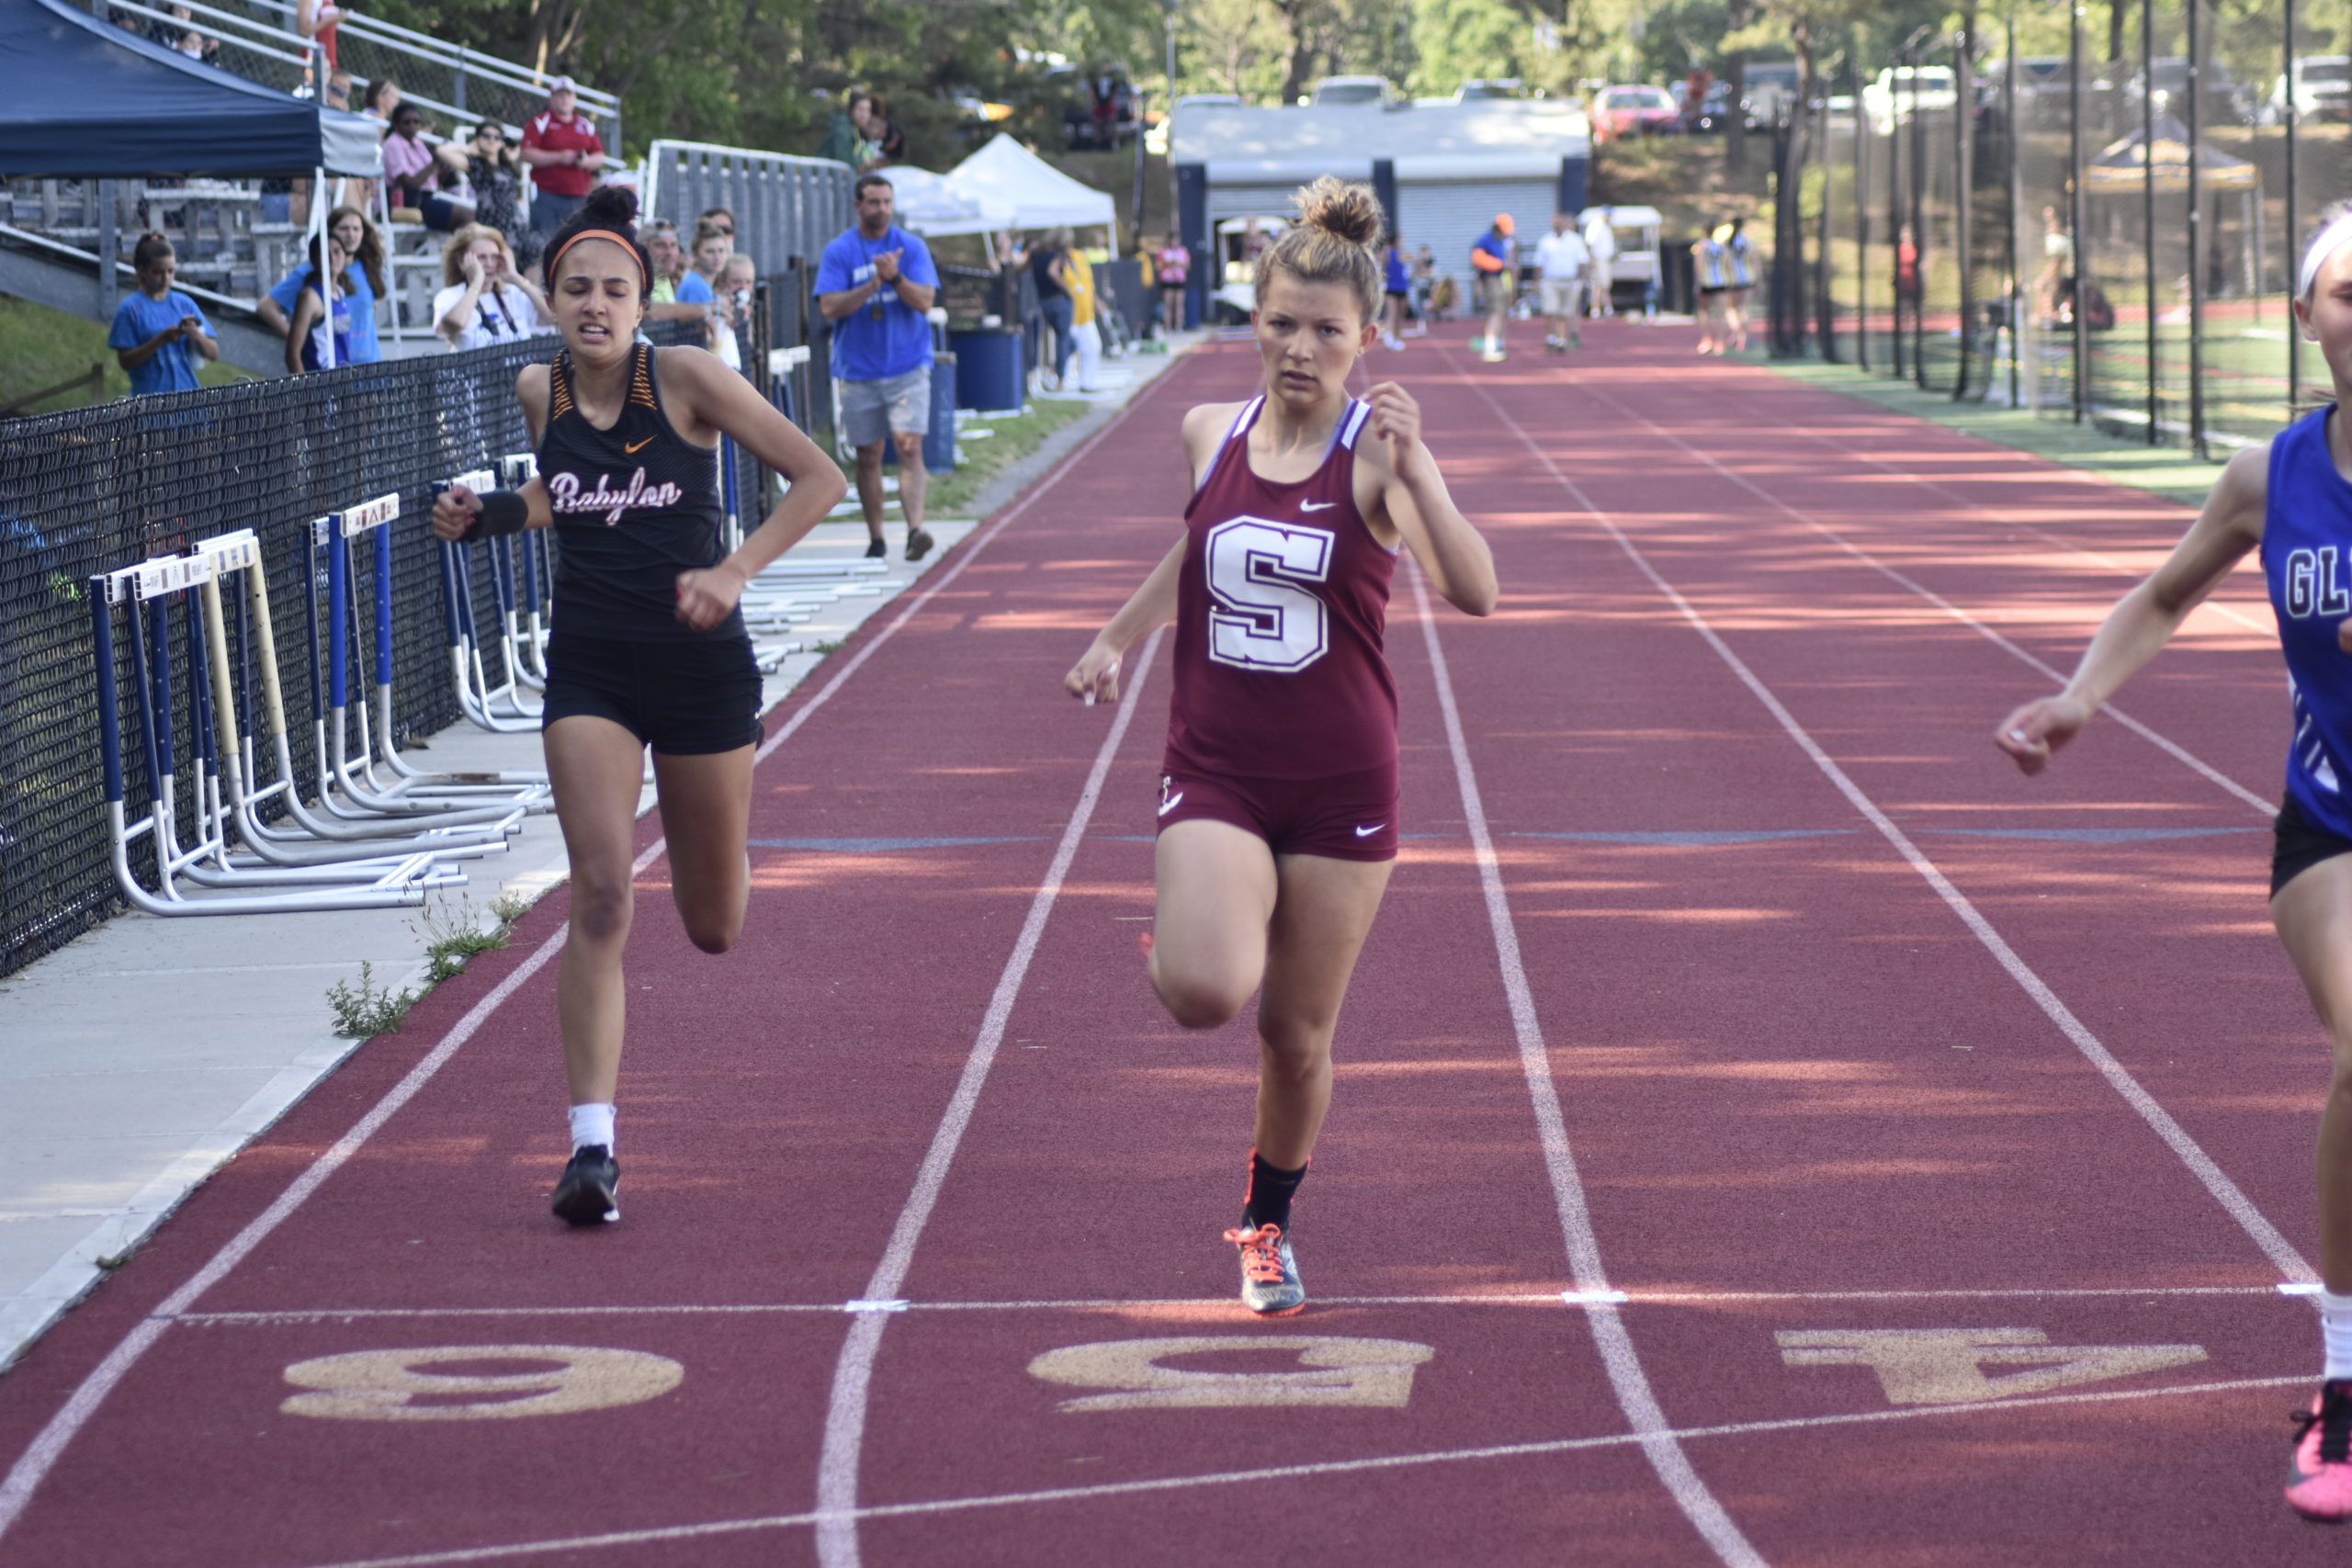 Southampton junior Gabriella Arnold placed fifth in the Division IV 100-meter dash on Thursday, June 10.